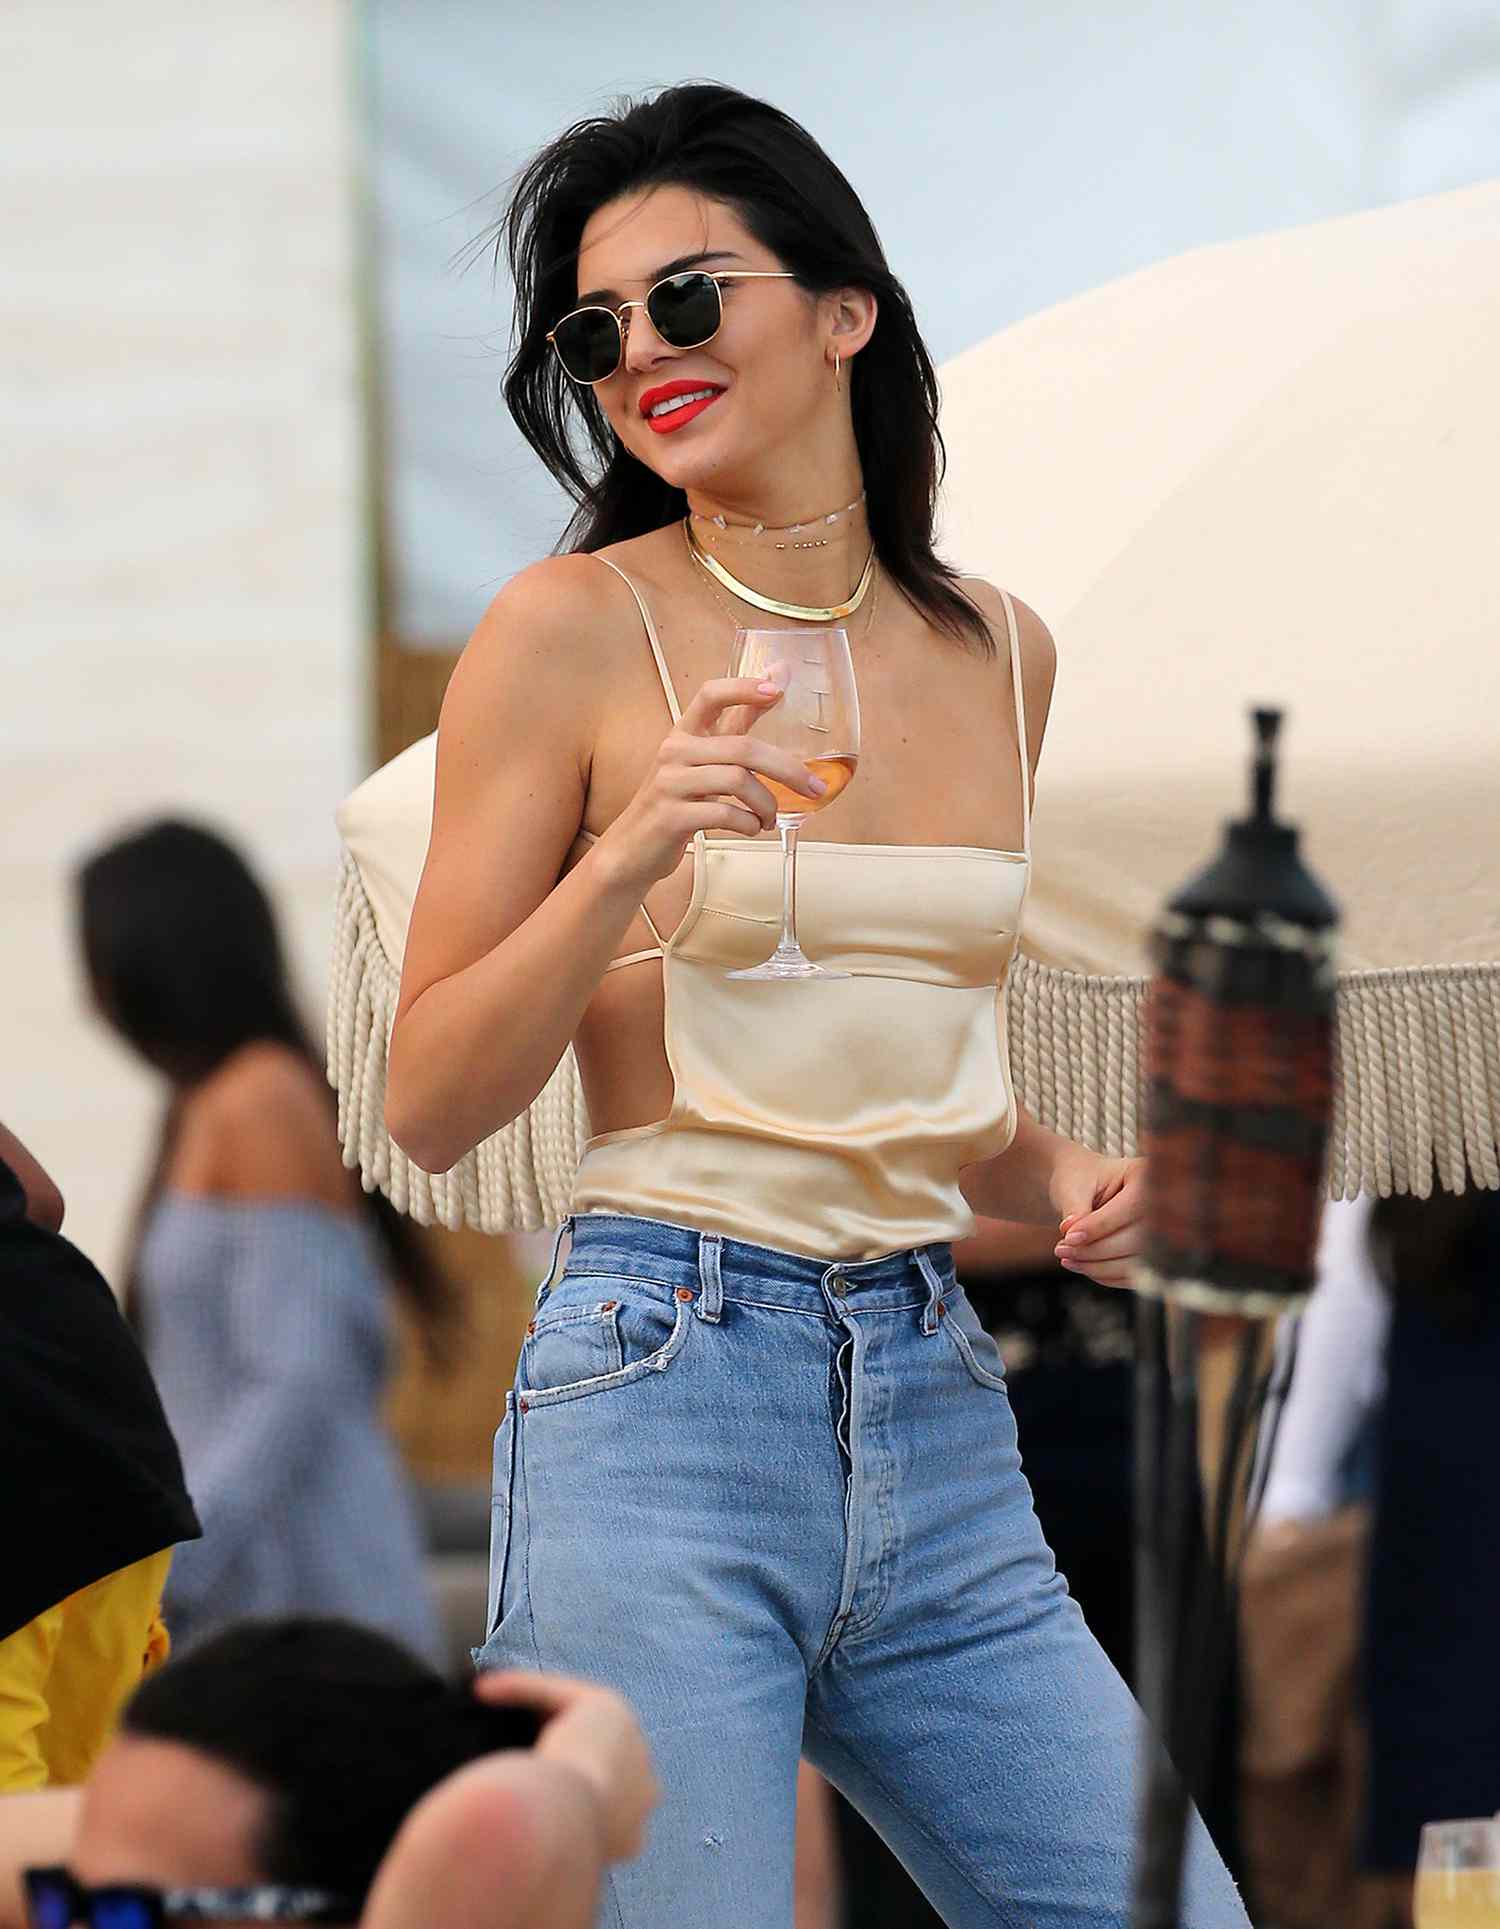 Kendall Jenner Wears A Silky Backless Top As She Enjoys A Glass Of Wine On The Beach In Miami